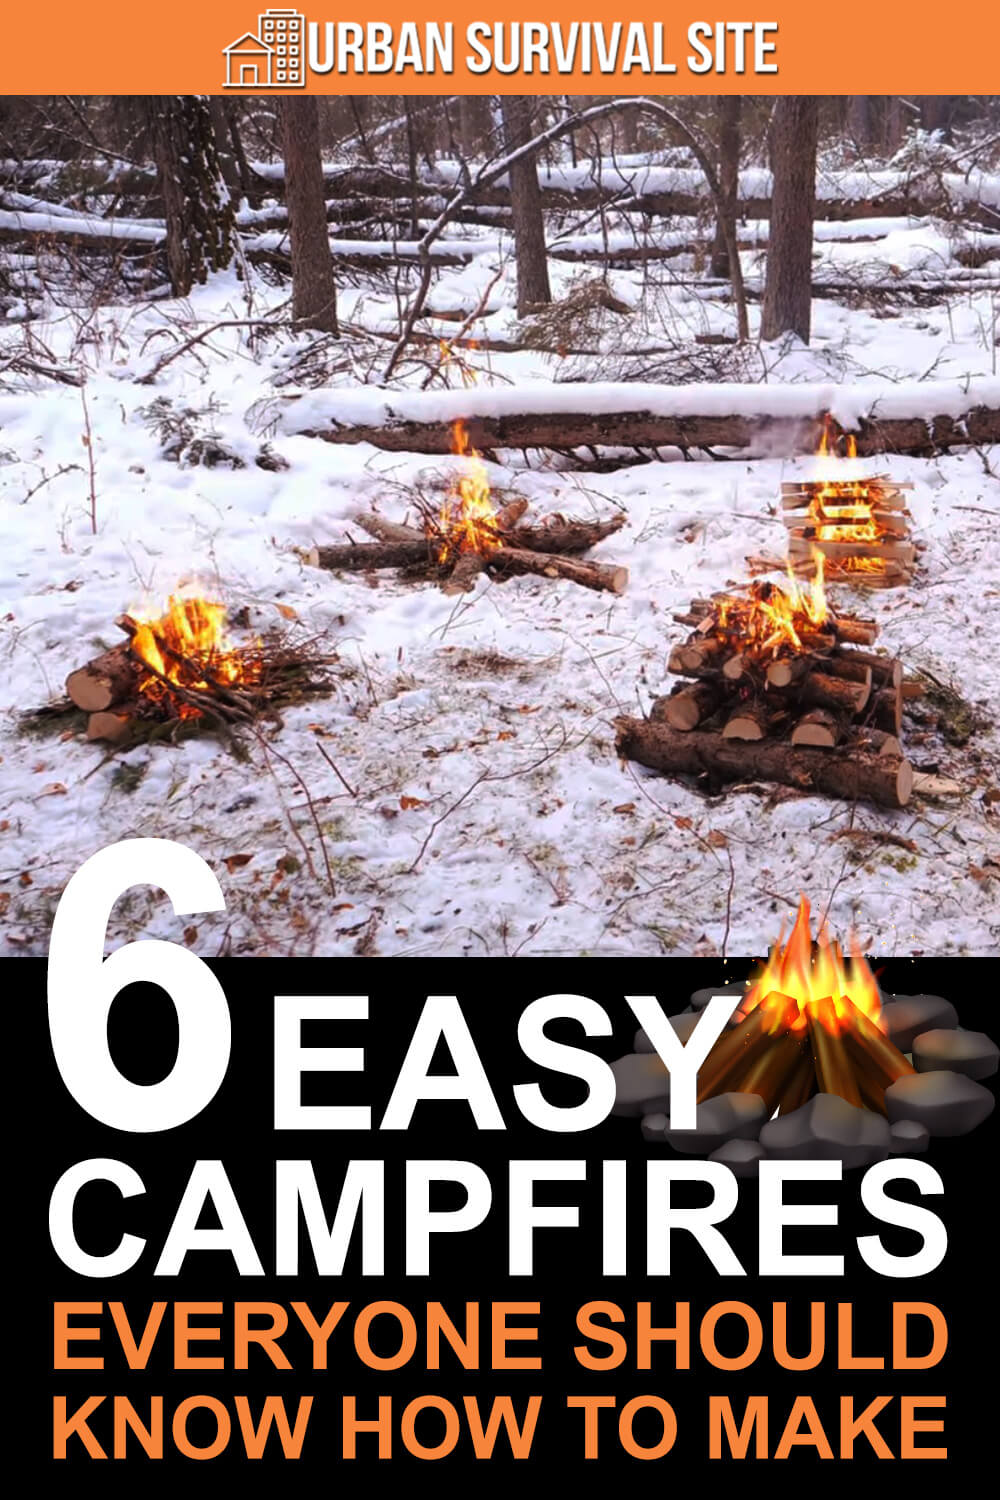 6 Easy Campfires Everyone Should Know How To Make